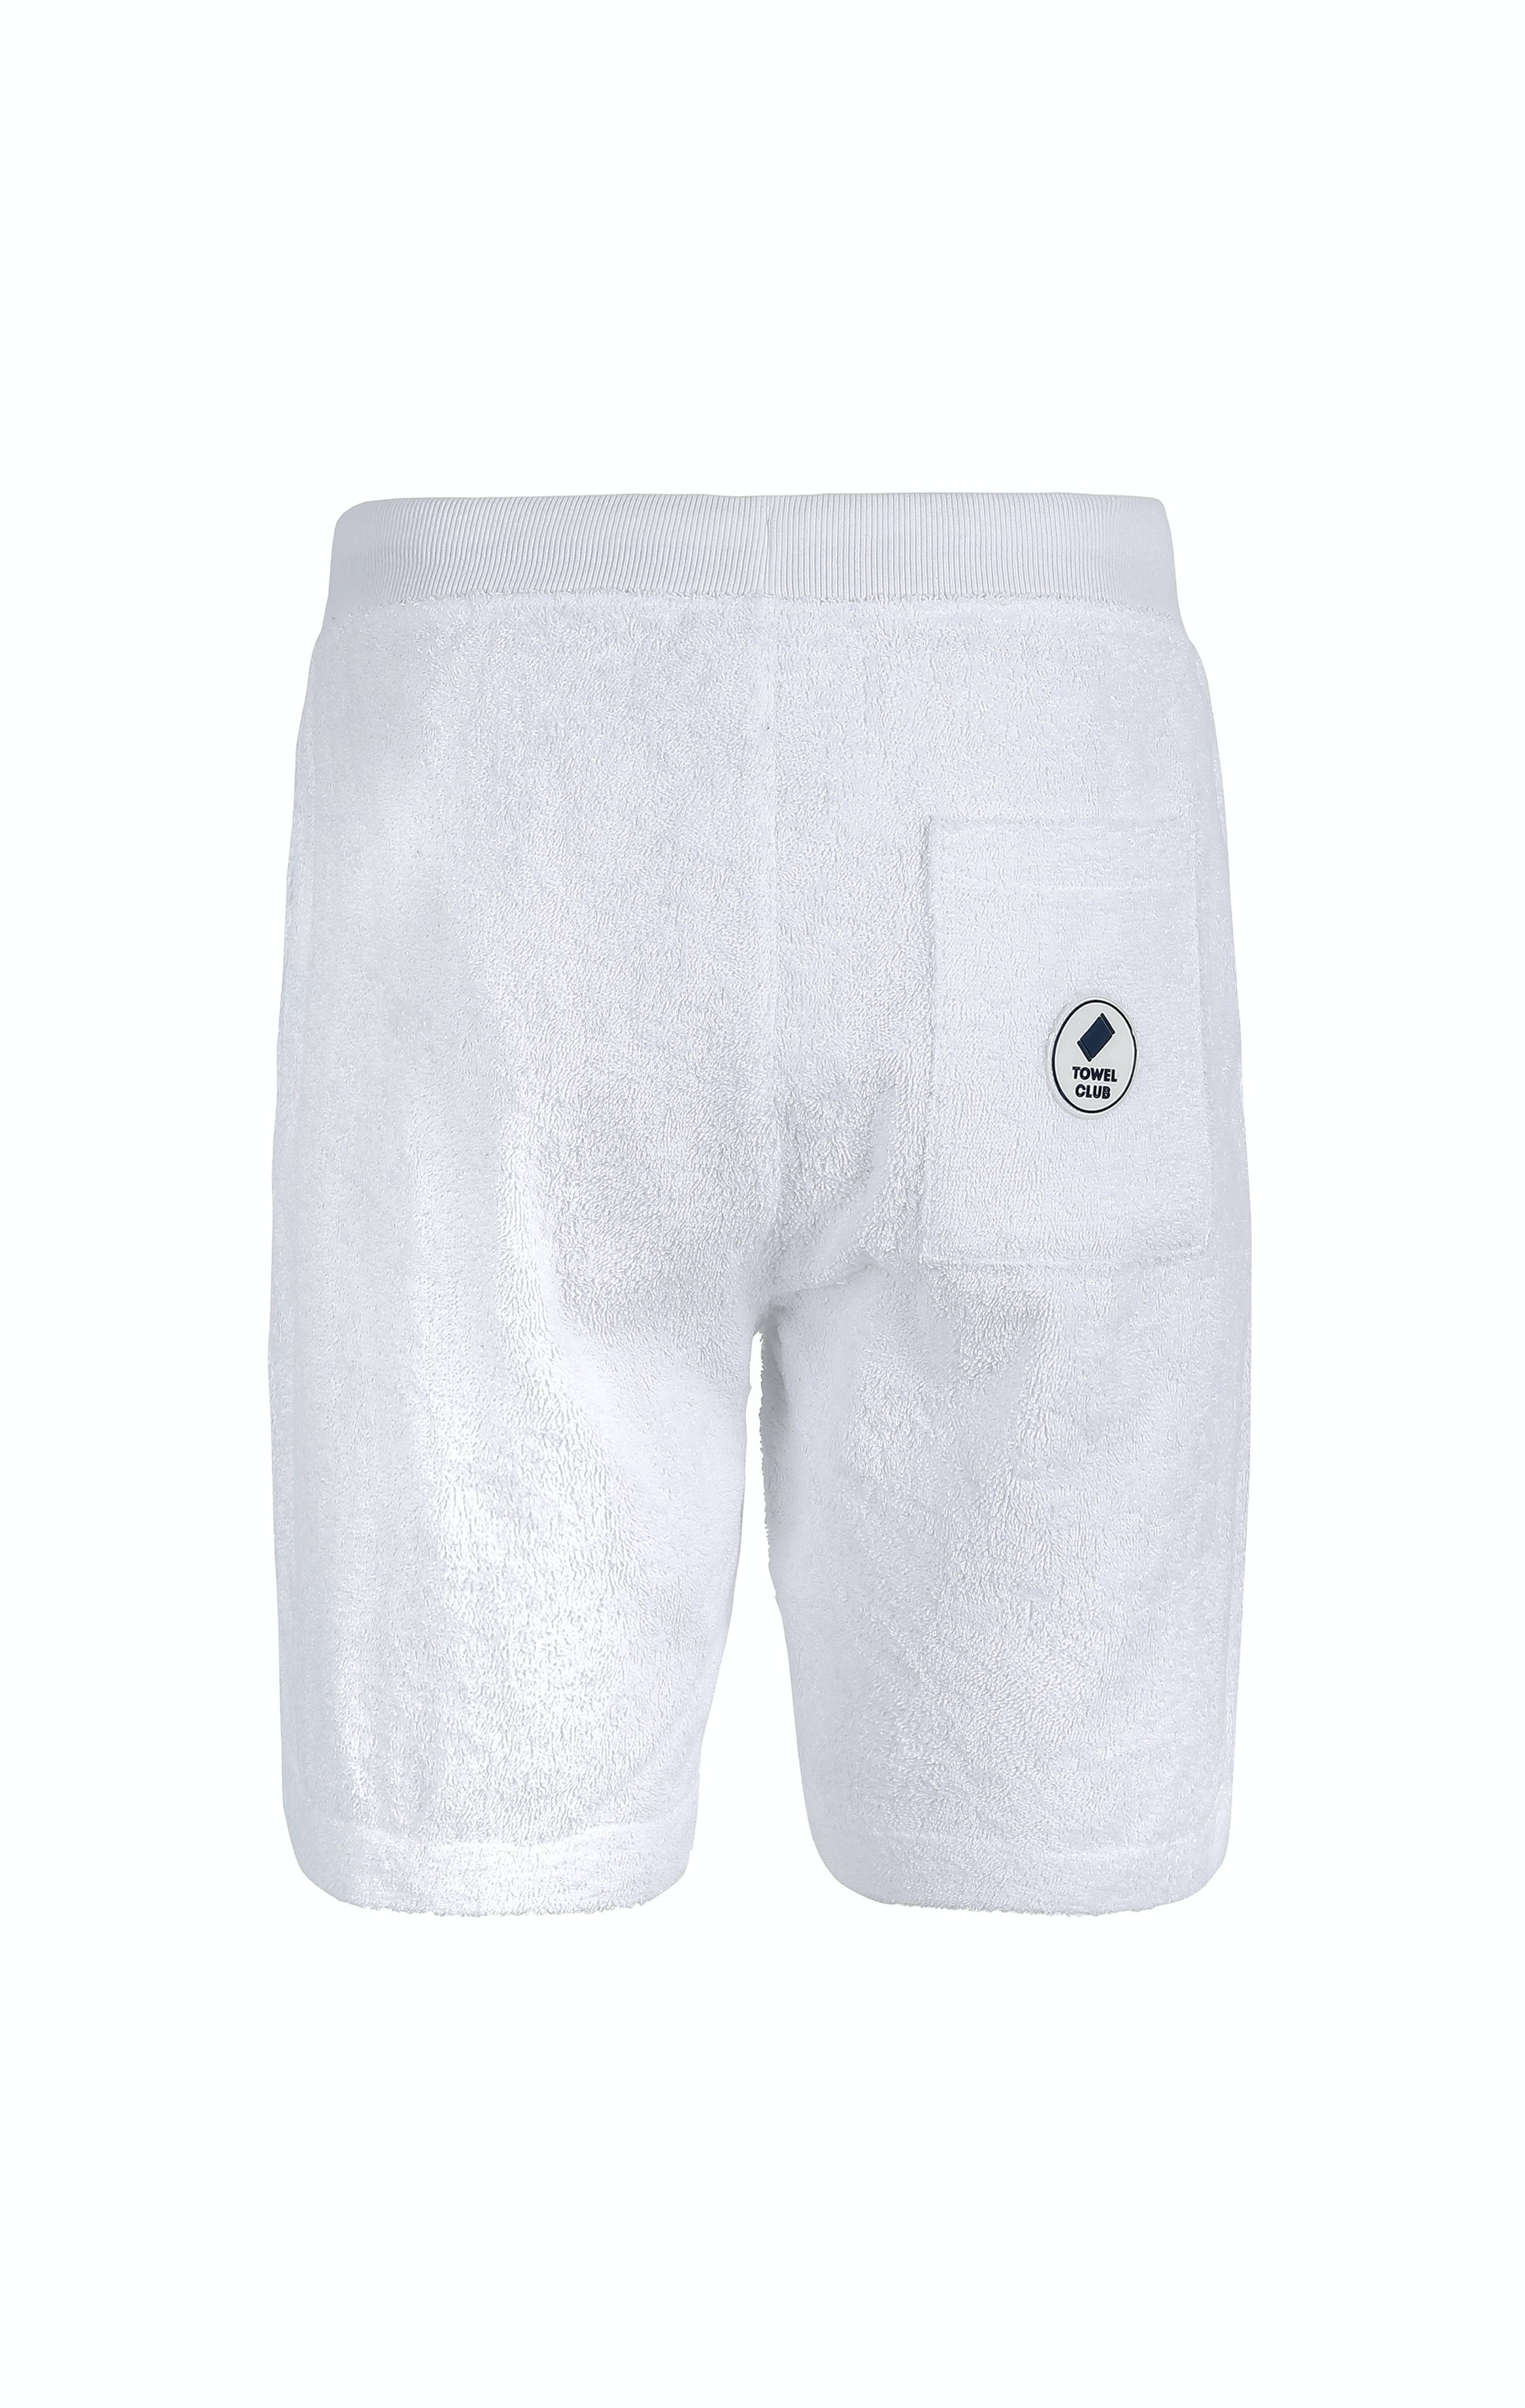 Onepiece Towel Shorts White - 2